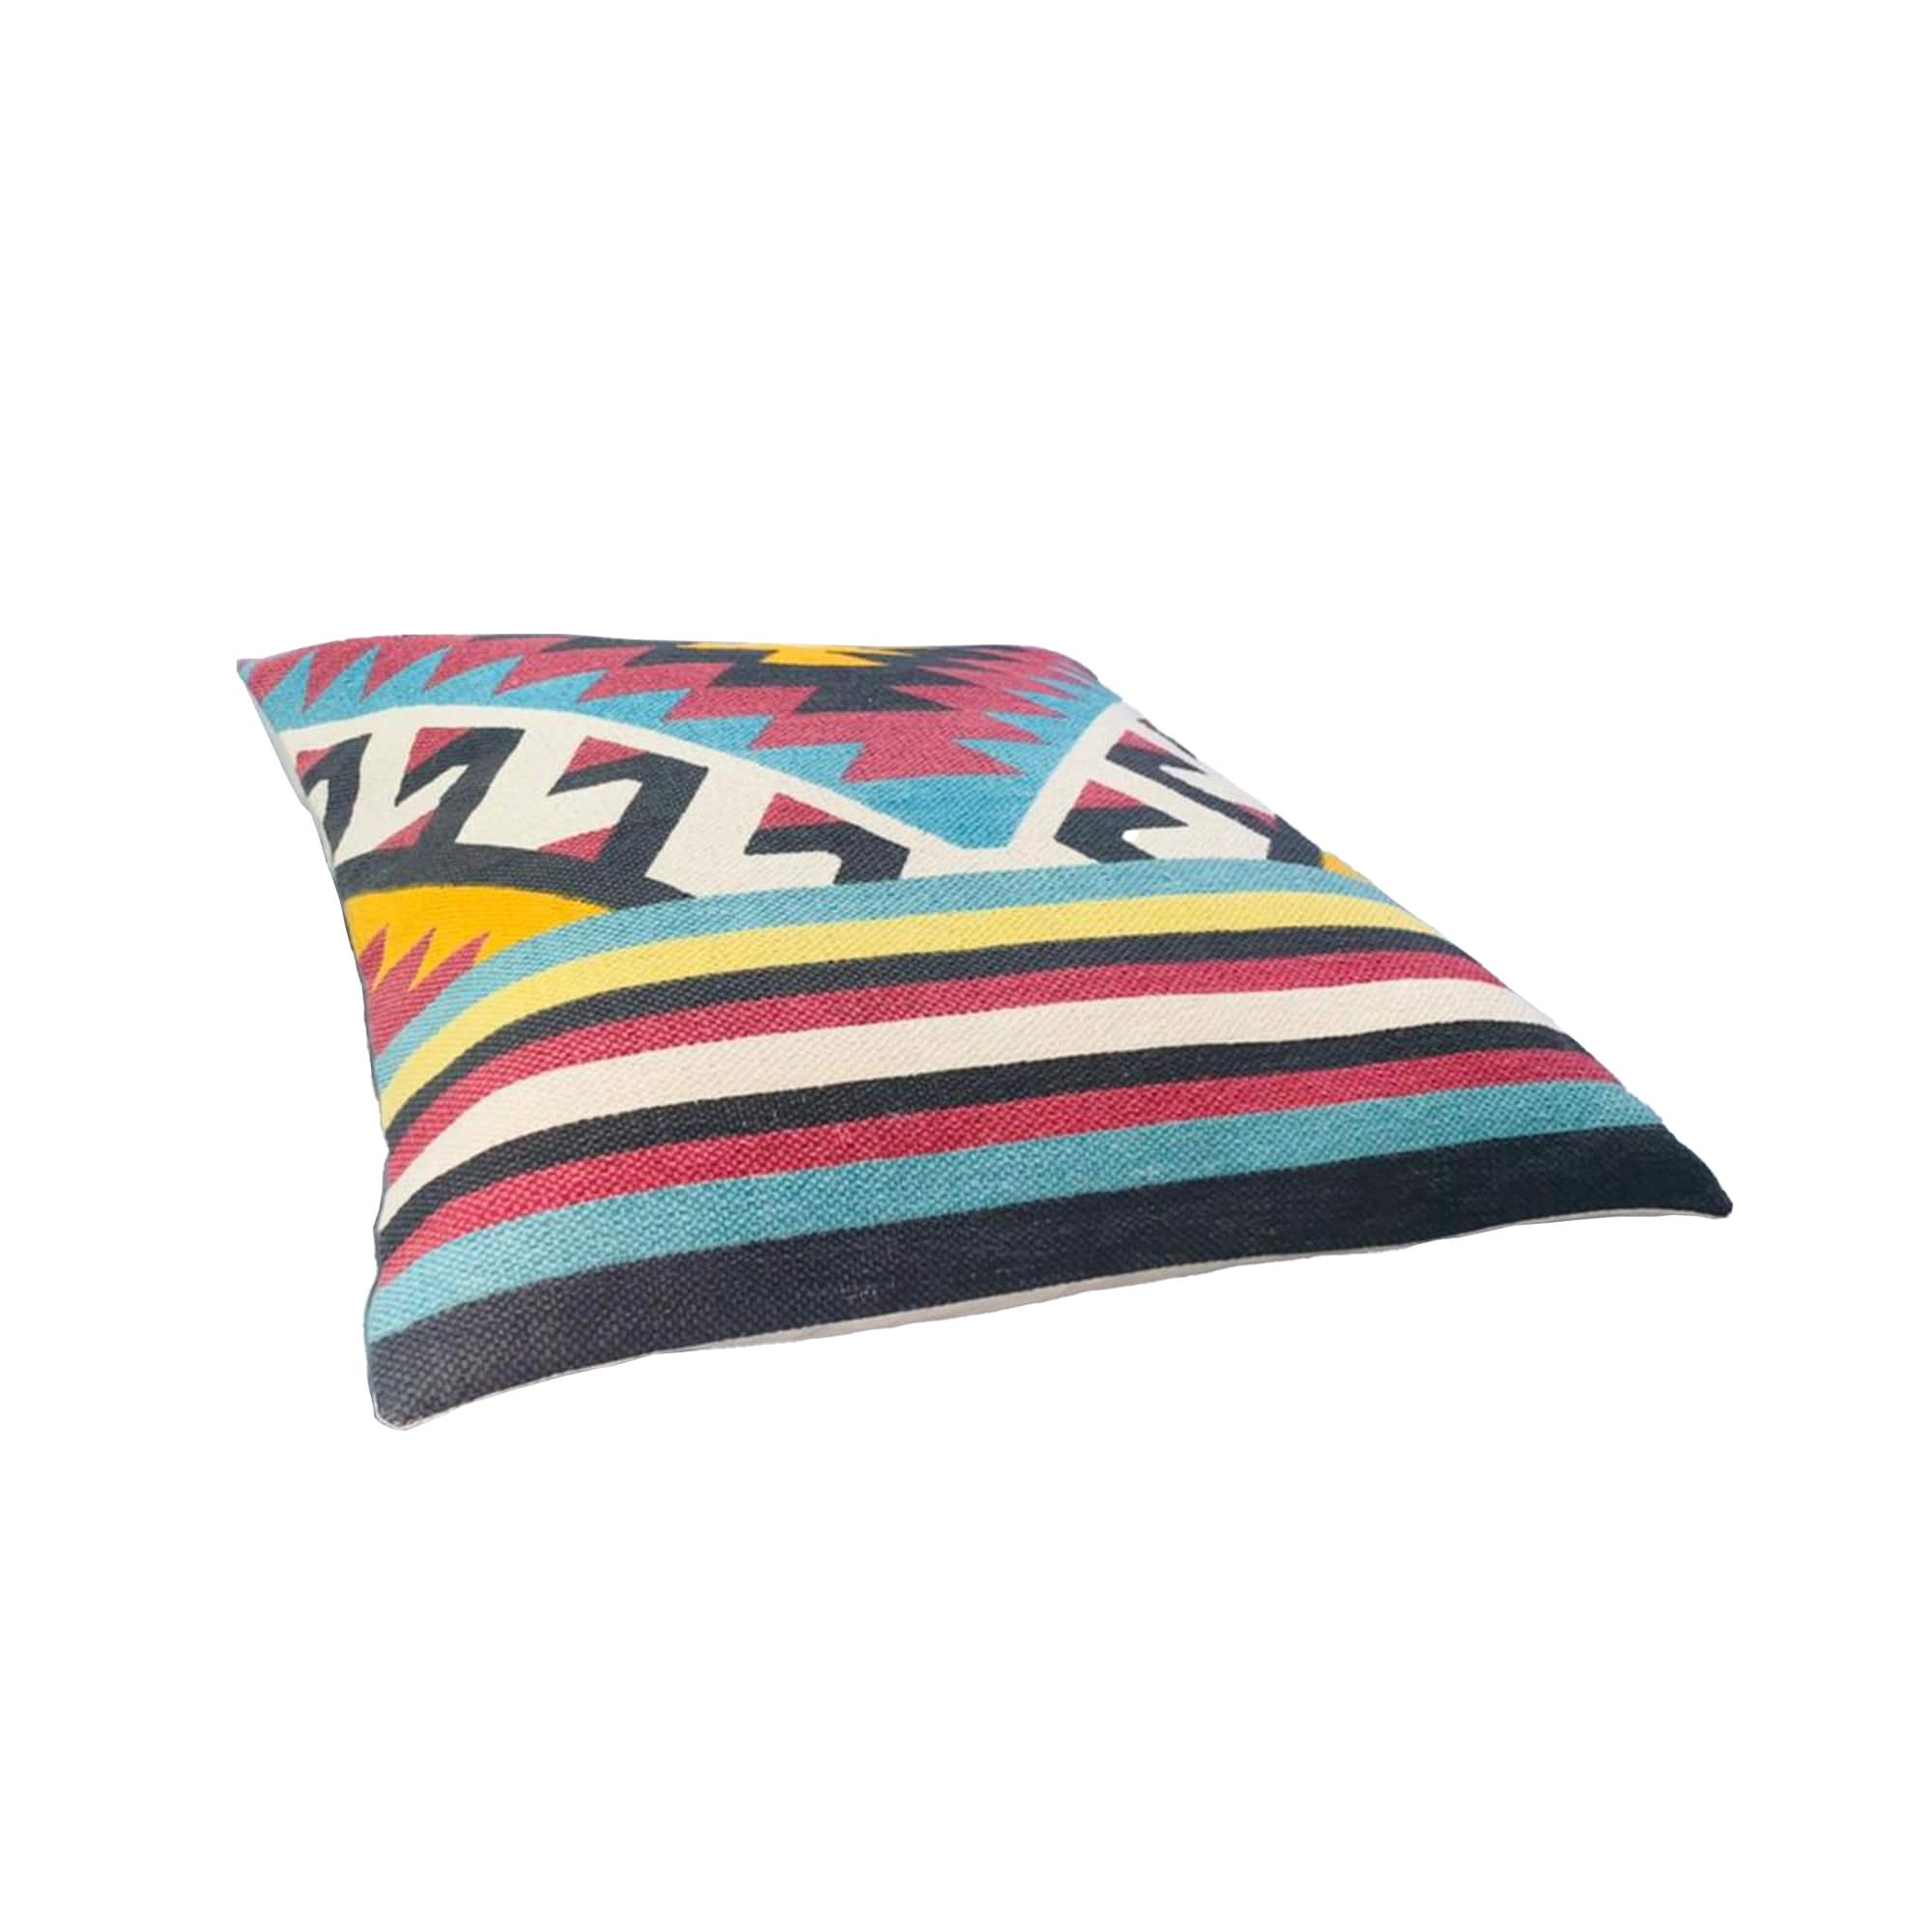 24 x 24 Inch Contemporary Bohemian Square Cotton Accent Throw Pillow ...